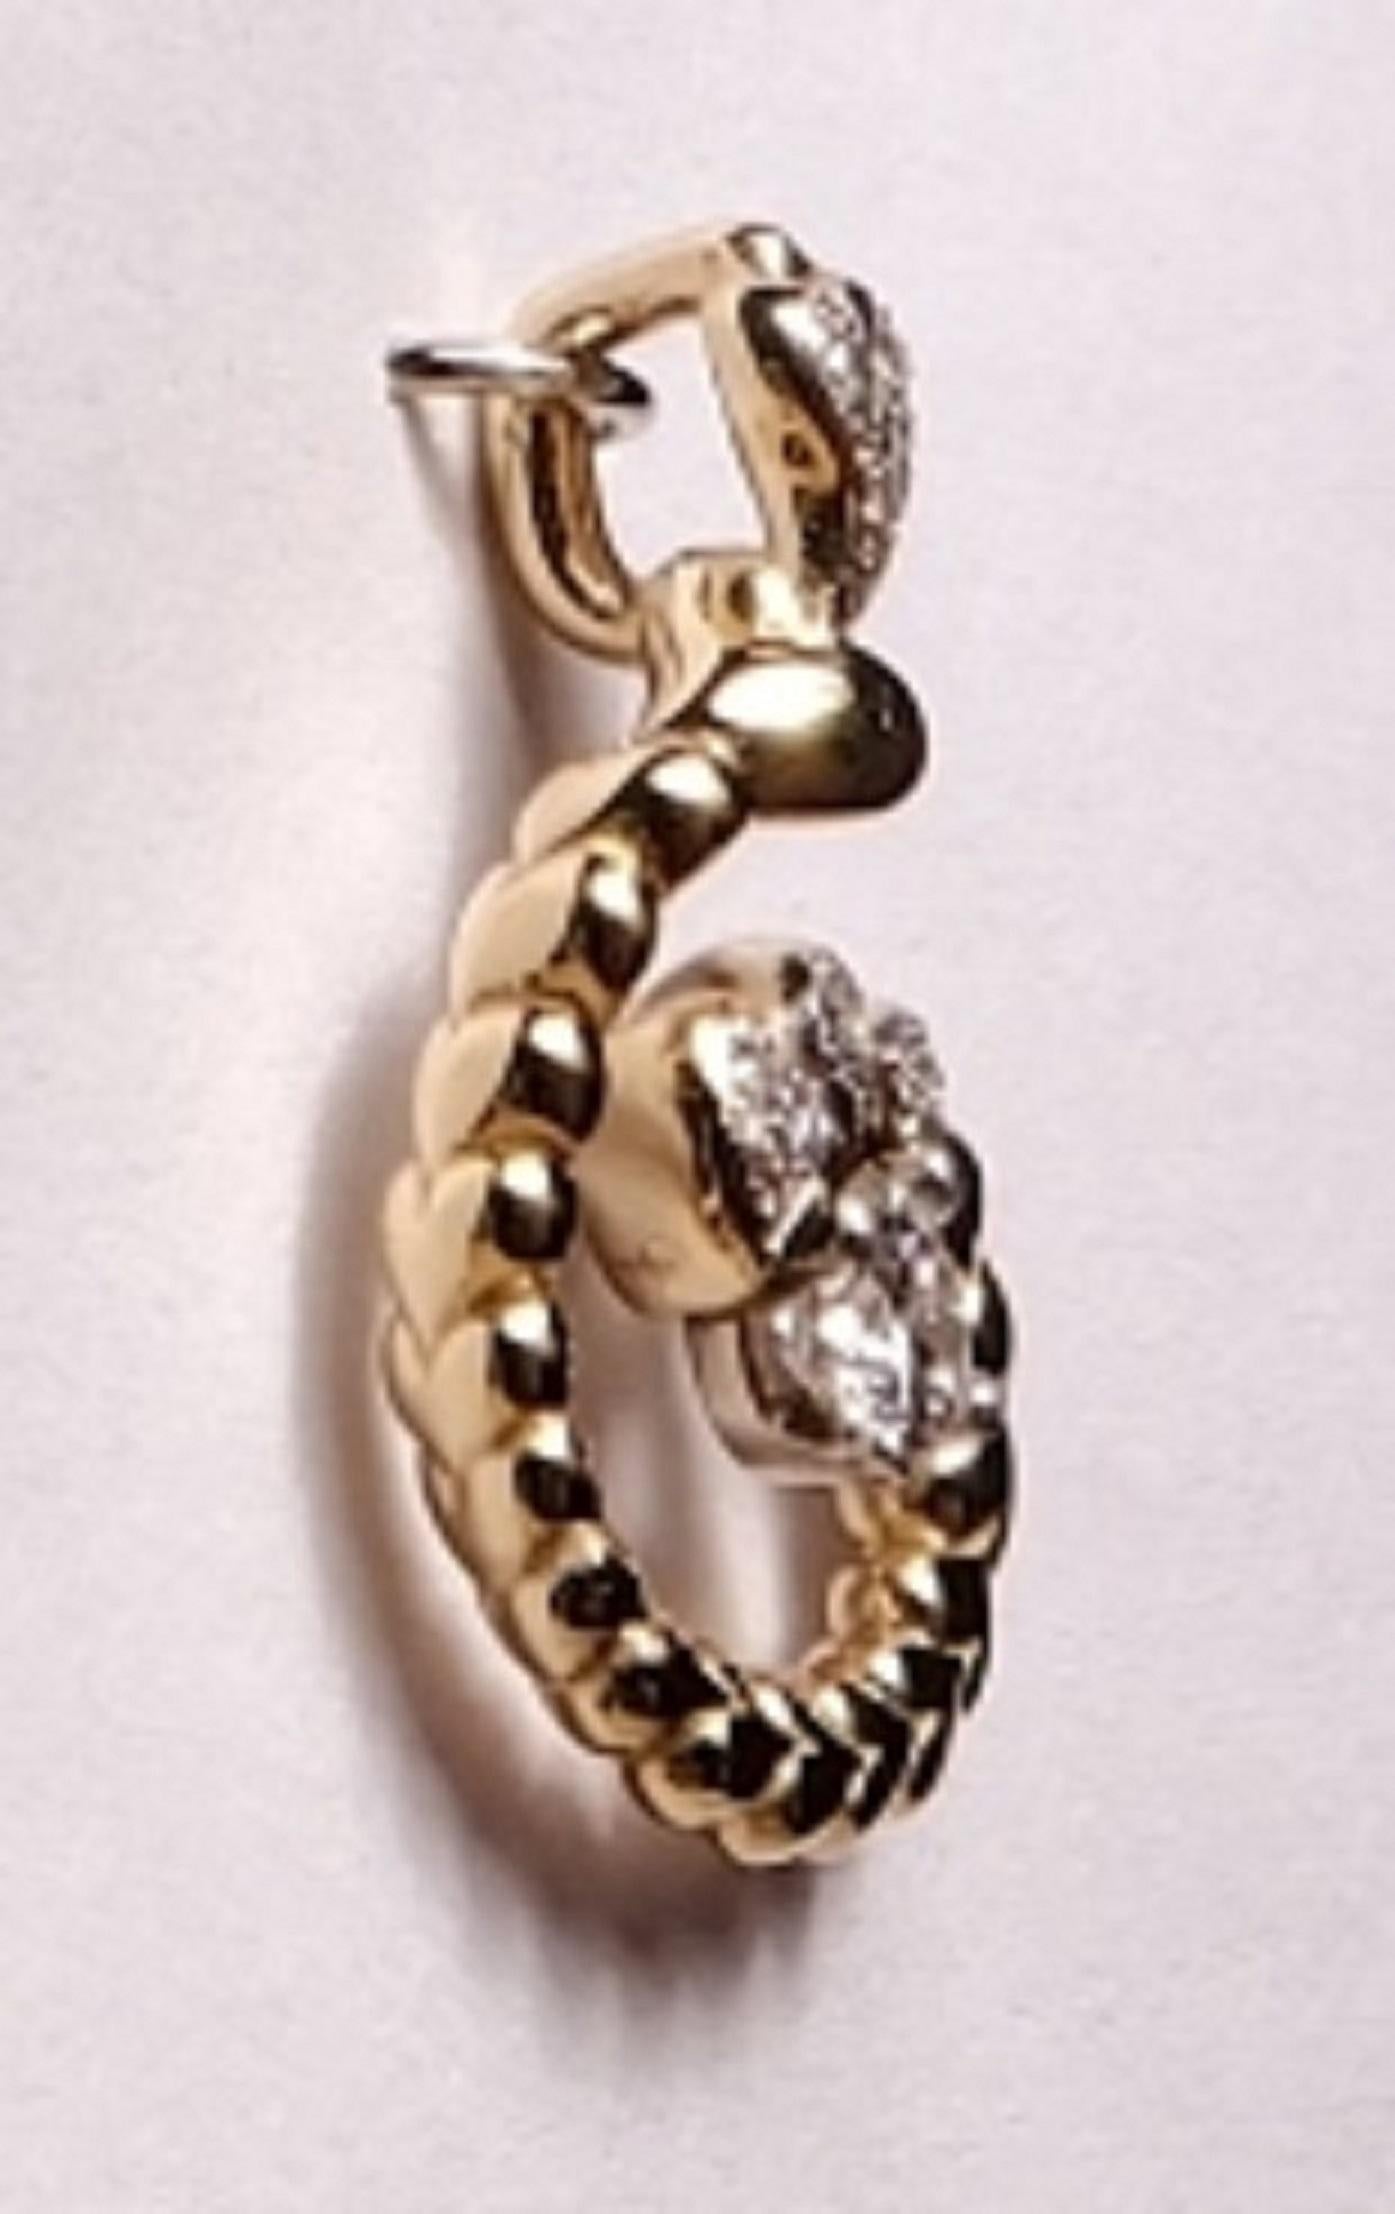 14k Yellow Gold Pendant with Diamonds are hearts that spiral around with a Flow of Love
stone: 1 round diamond .20pts.
stones: 13 diamonds .09pts.
color: G
clarity: VS
weight: .94pts.
gold: 14k
*Peggy Croft is hand wax carver of fine jewelry with